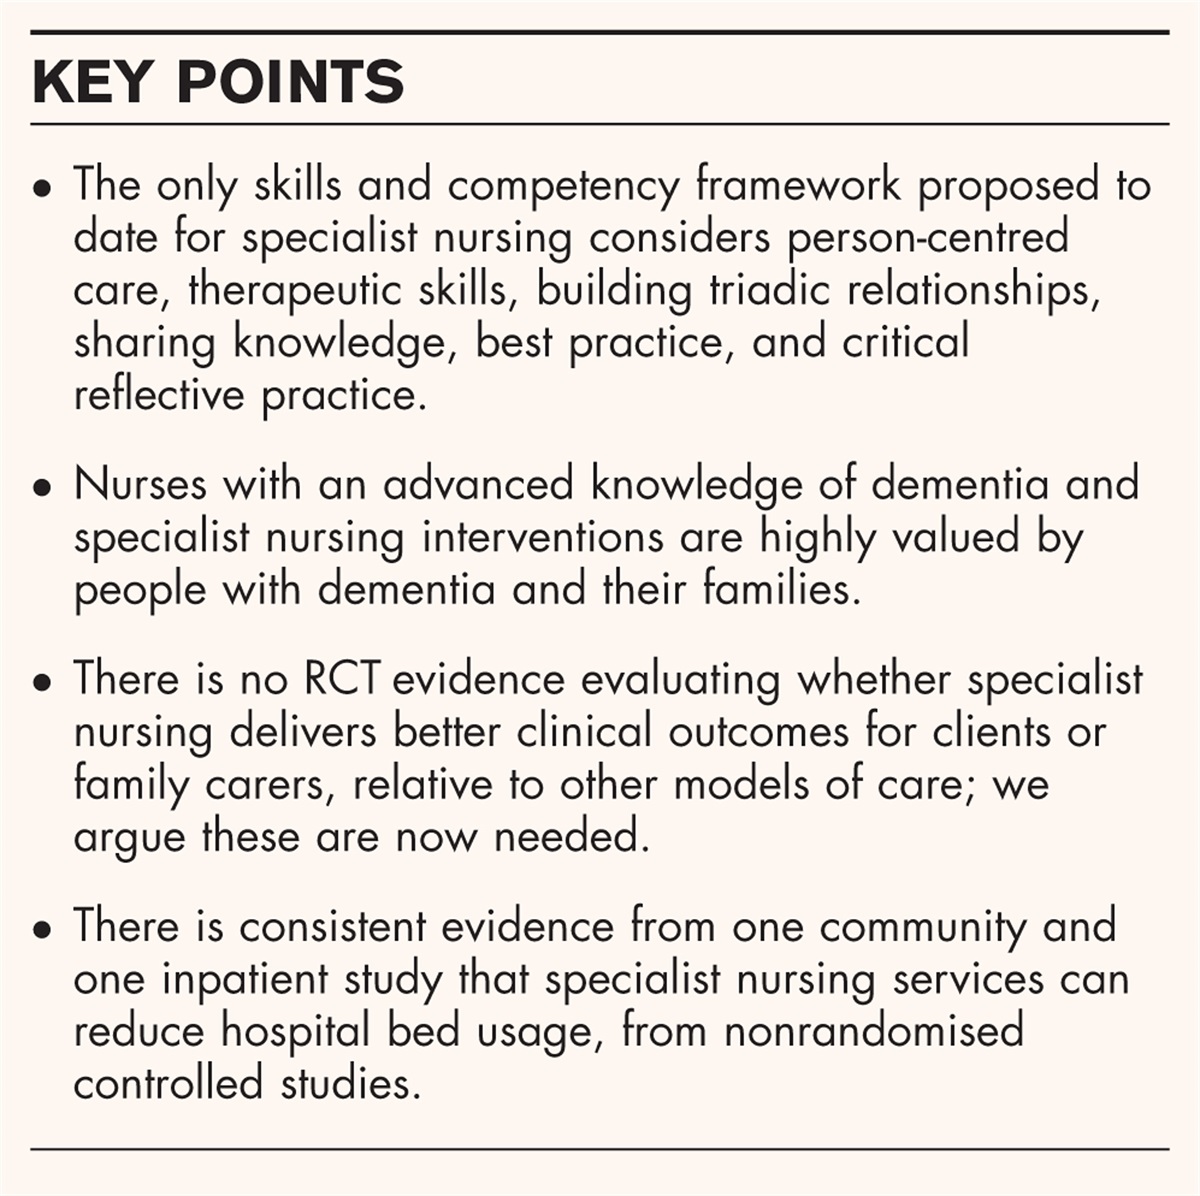 Specialist dementia nursing models and impacts: a systematic review